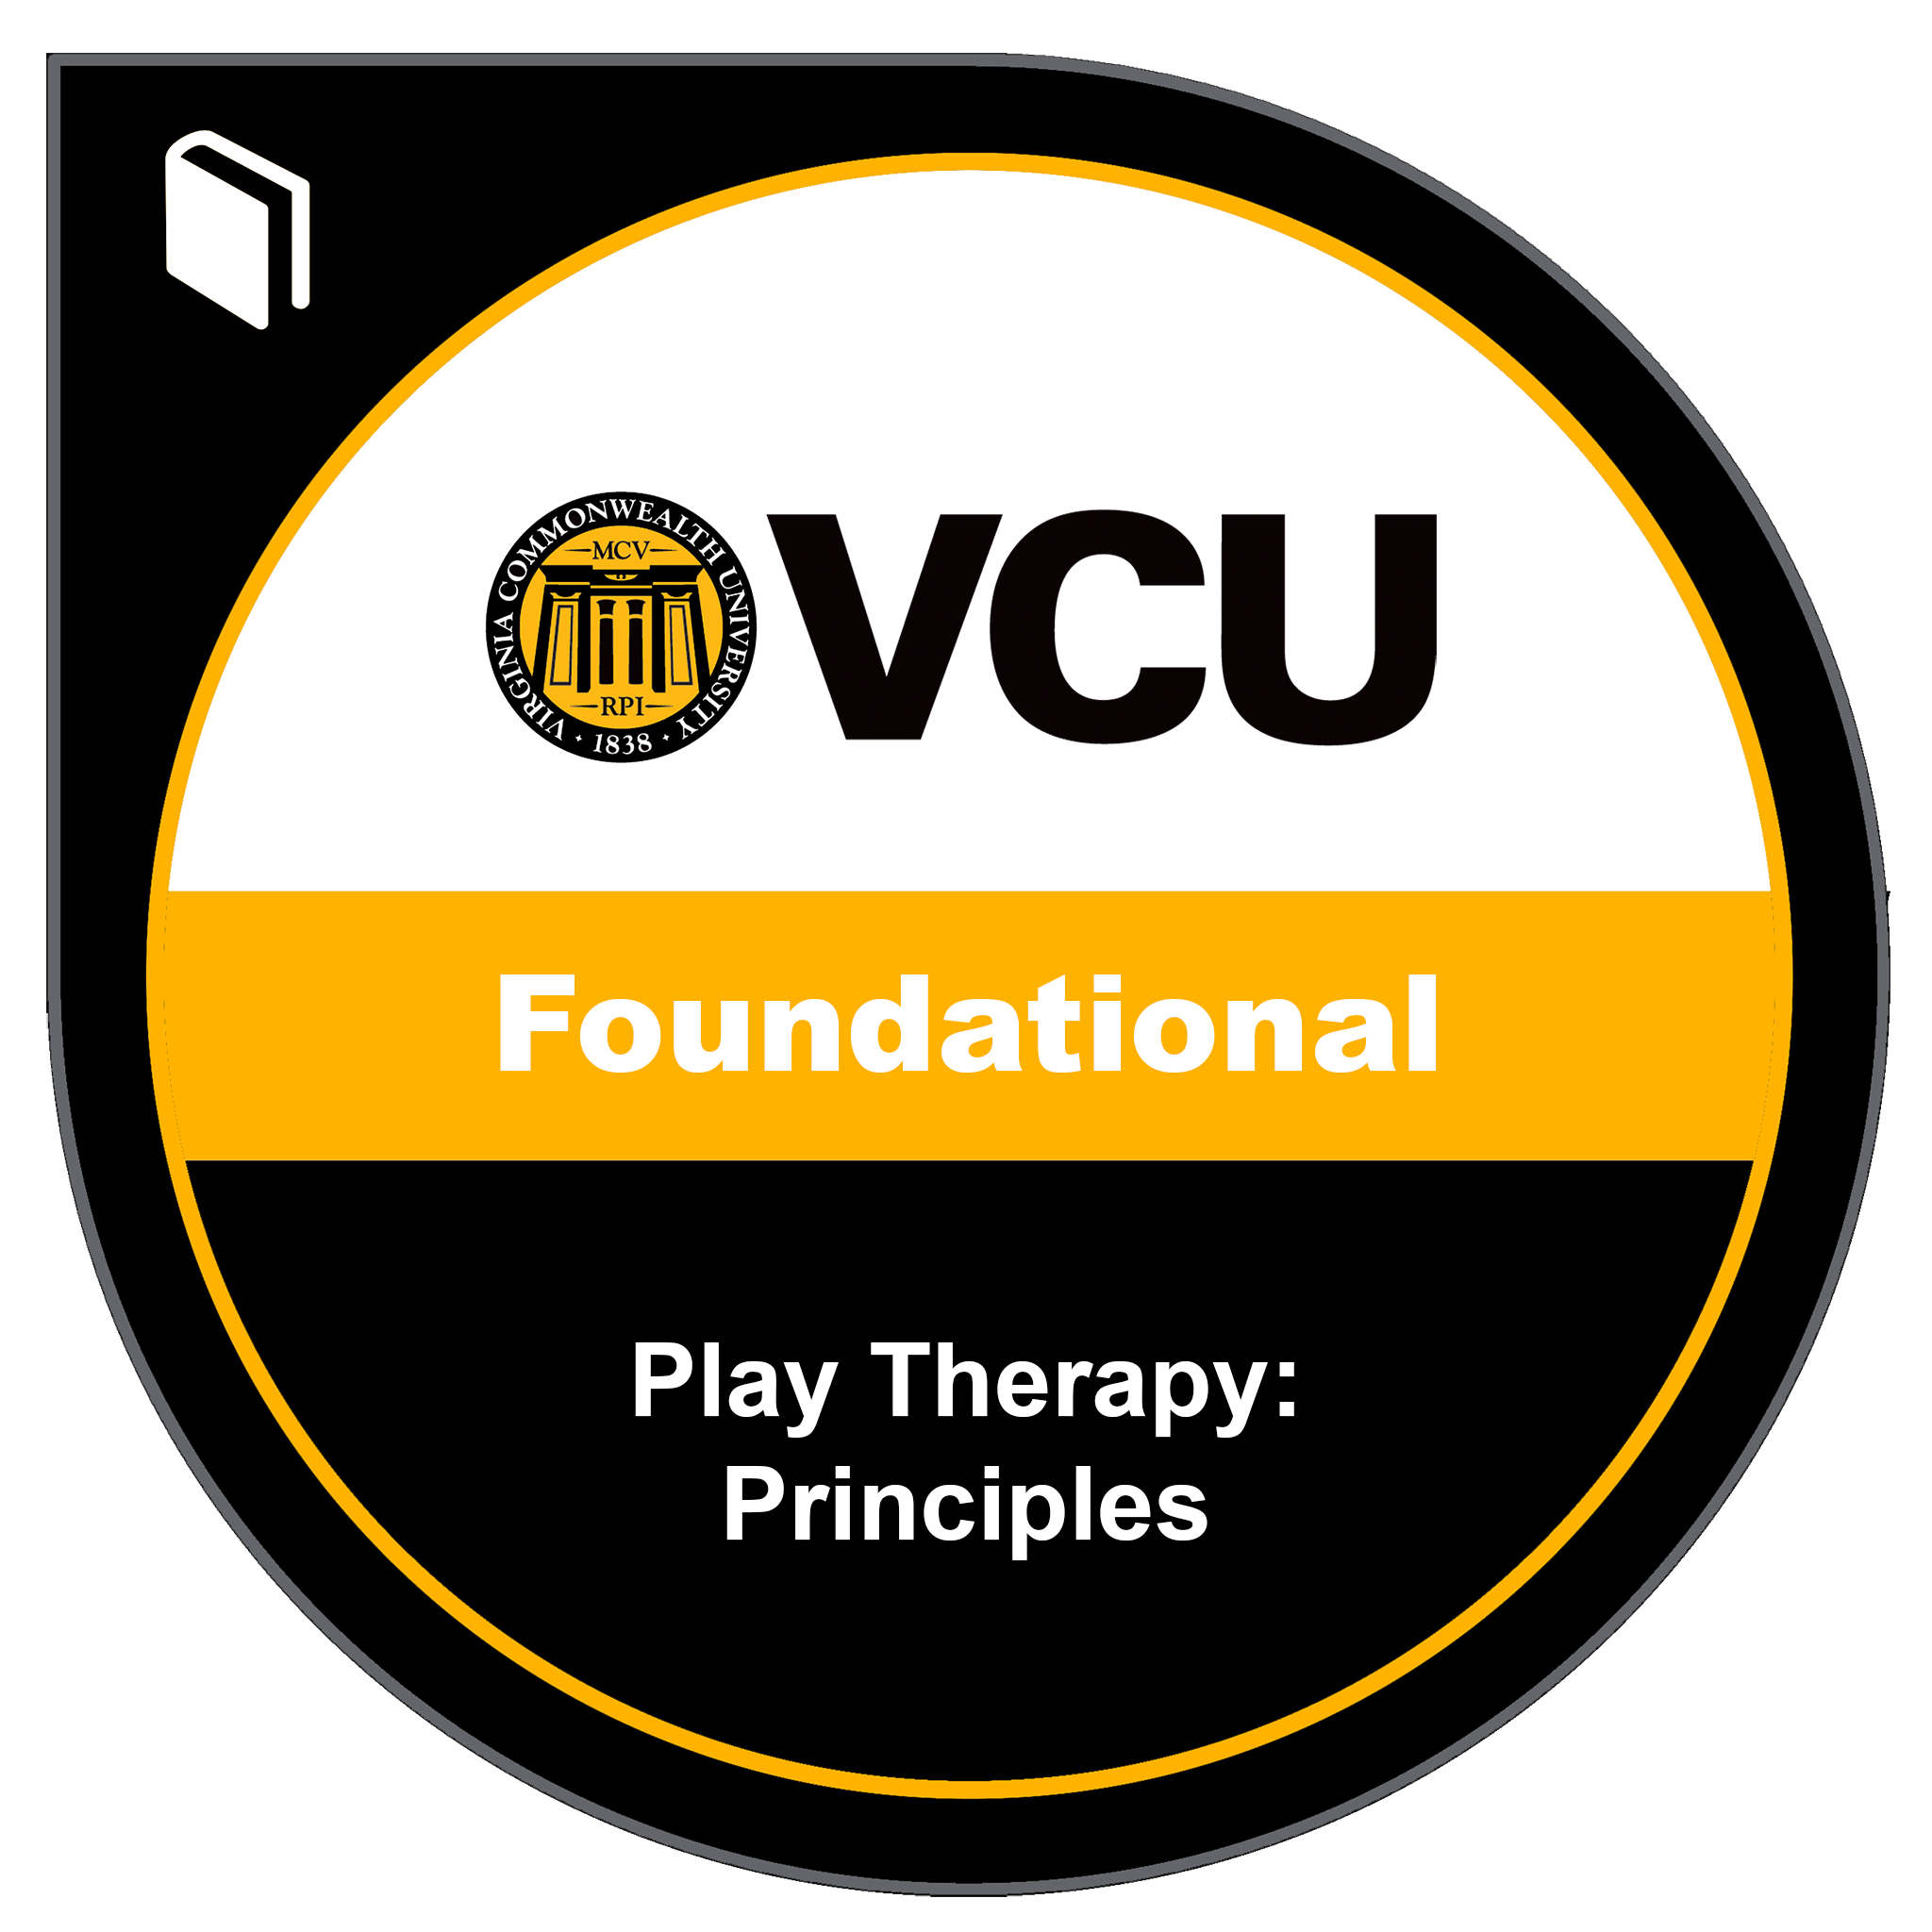 Digital badge visual for completing the Principles of Play Therapy workshop